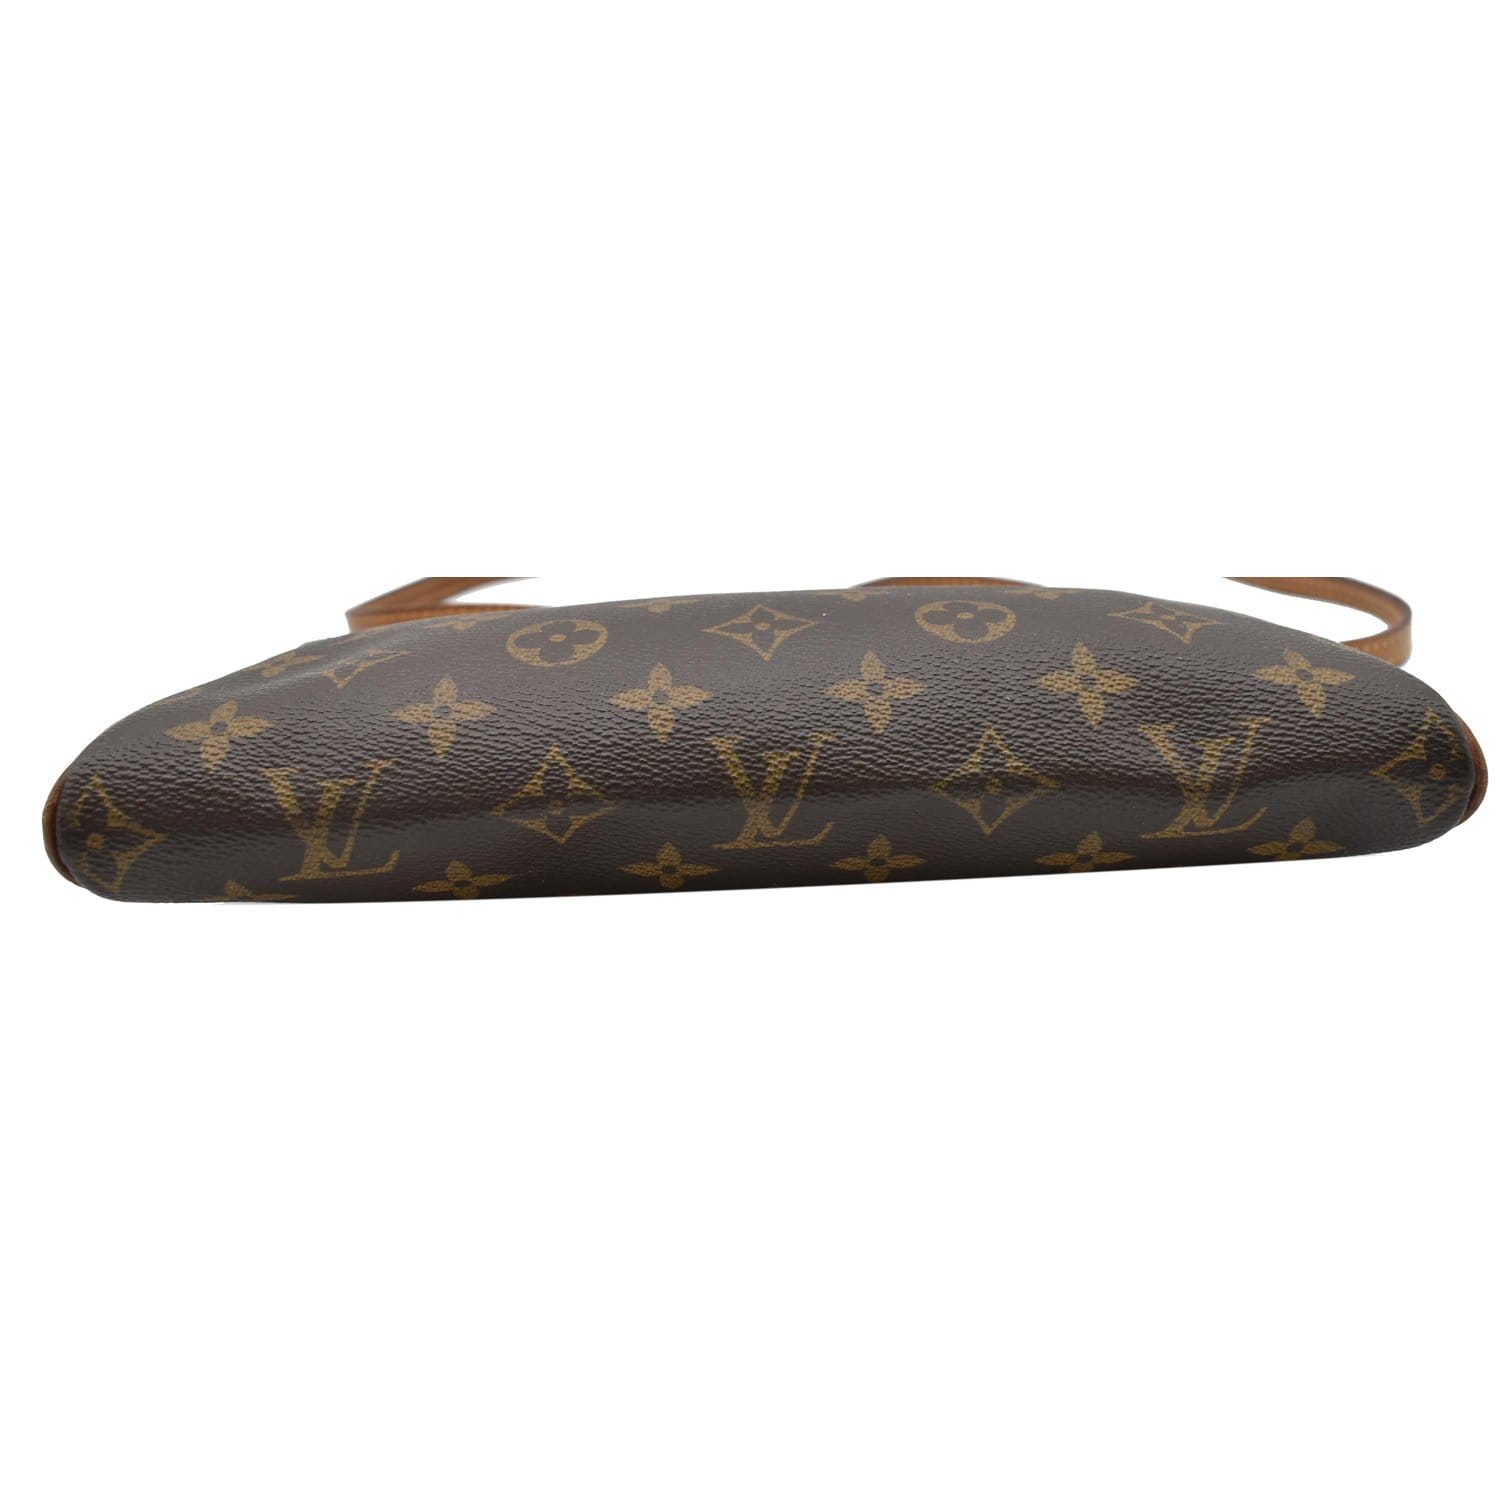 Louis Vuitton POCHETTE EVA BROWN AUTHENTIC - $890 (49% Off Retail) - From  Mindhy